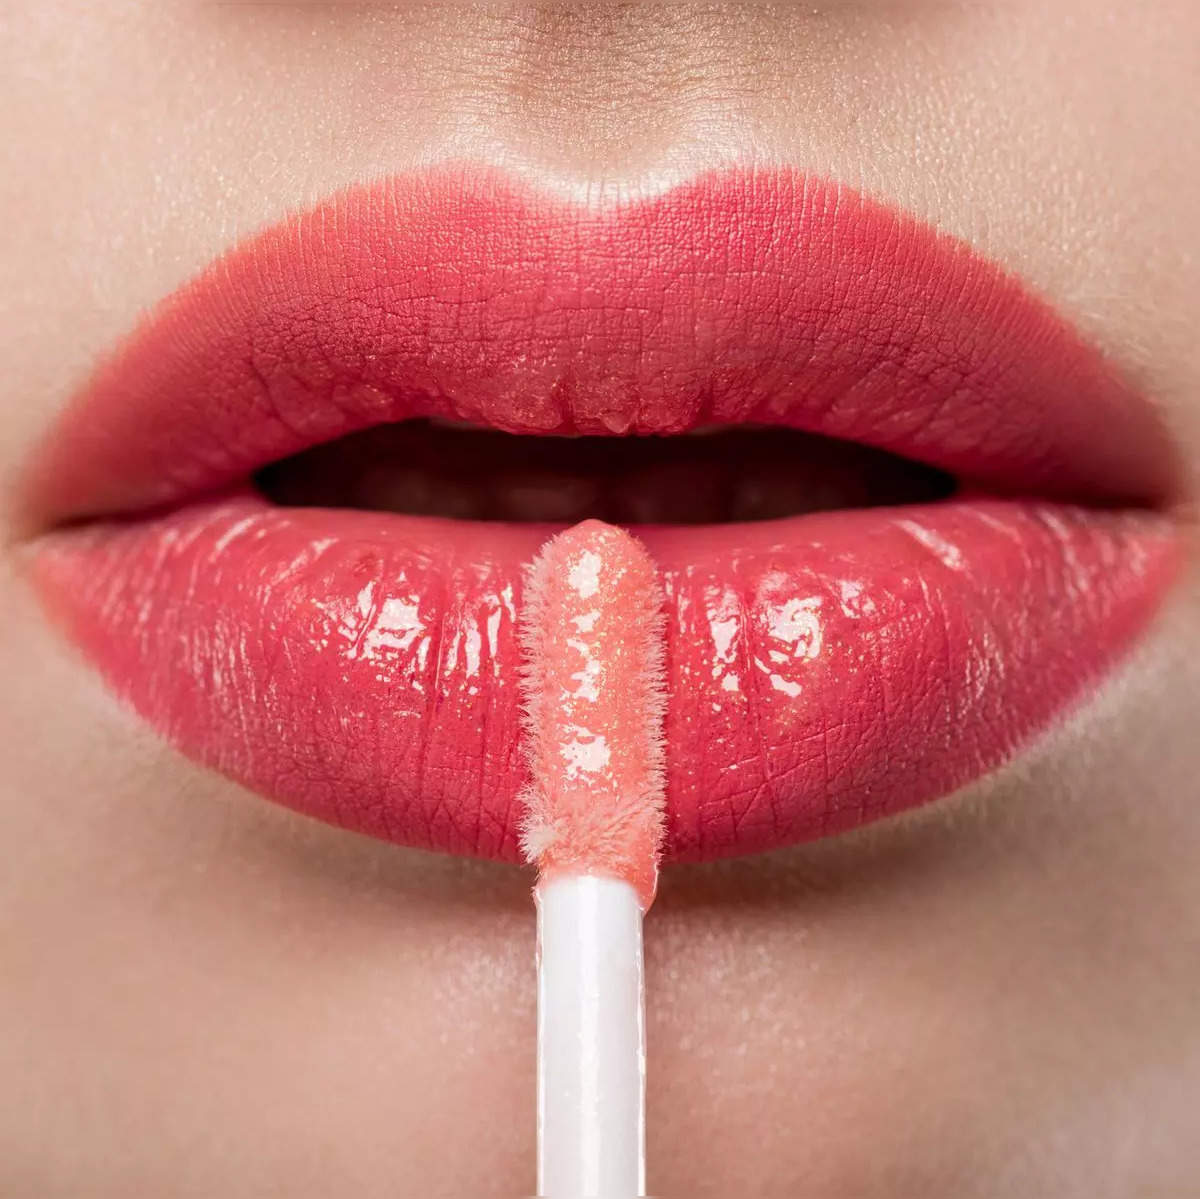 Lip Care Products Companies - Top Company List